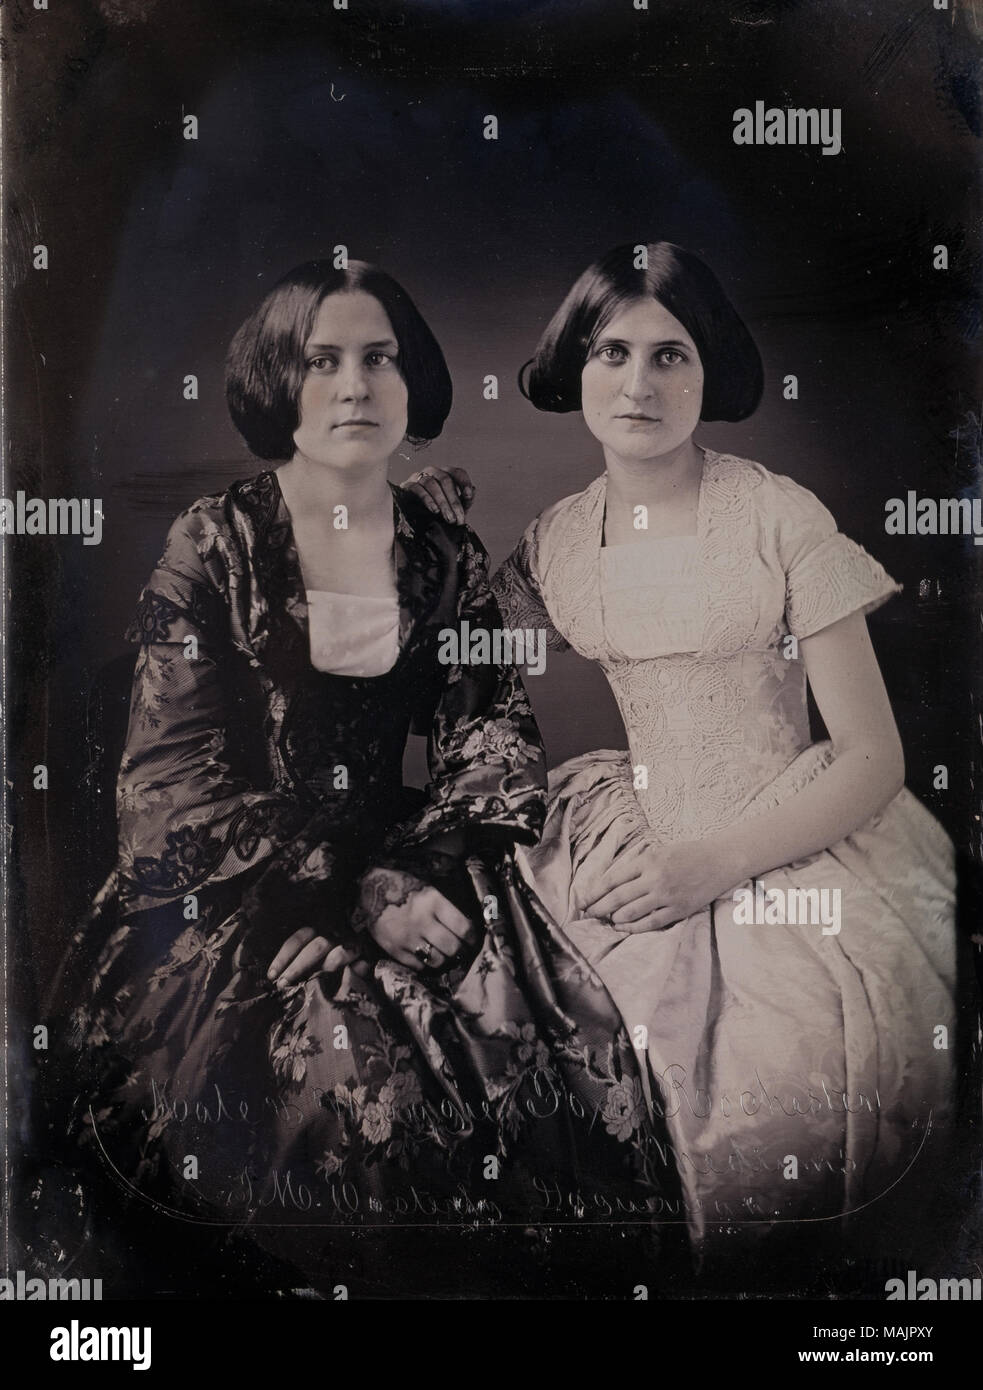 Portrait of Kate and Maggie Fox, Spirit Mediums from Rochester, New York. Along the bottom edge of the daguerreotype 'Kate and Maggie Fox, Rochester Mediums, T.M. Easterly Daguerrean' is inscribed. Portions of the daguerreotype are colored with pink pigment. Title: Kate and Maggie Fox, Spirit Mediums from Rochester, New York.  . 1852. Thomas M. Easterly Stock Photo